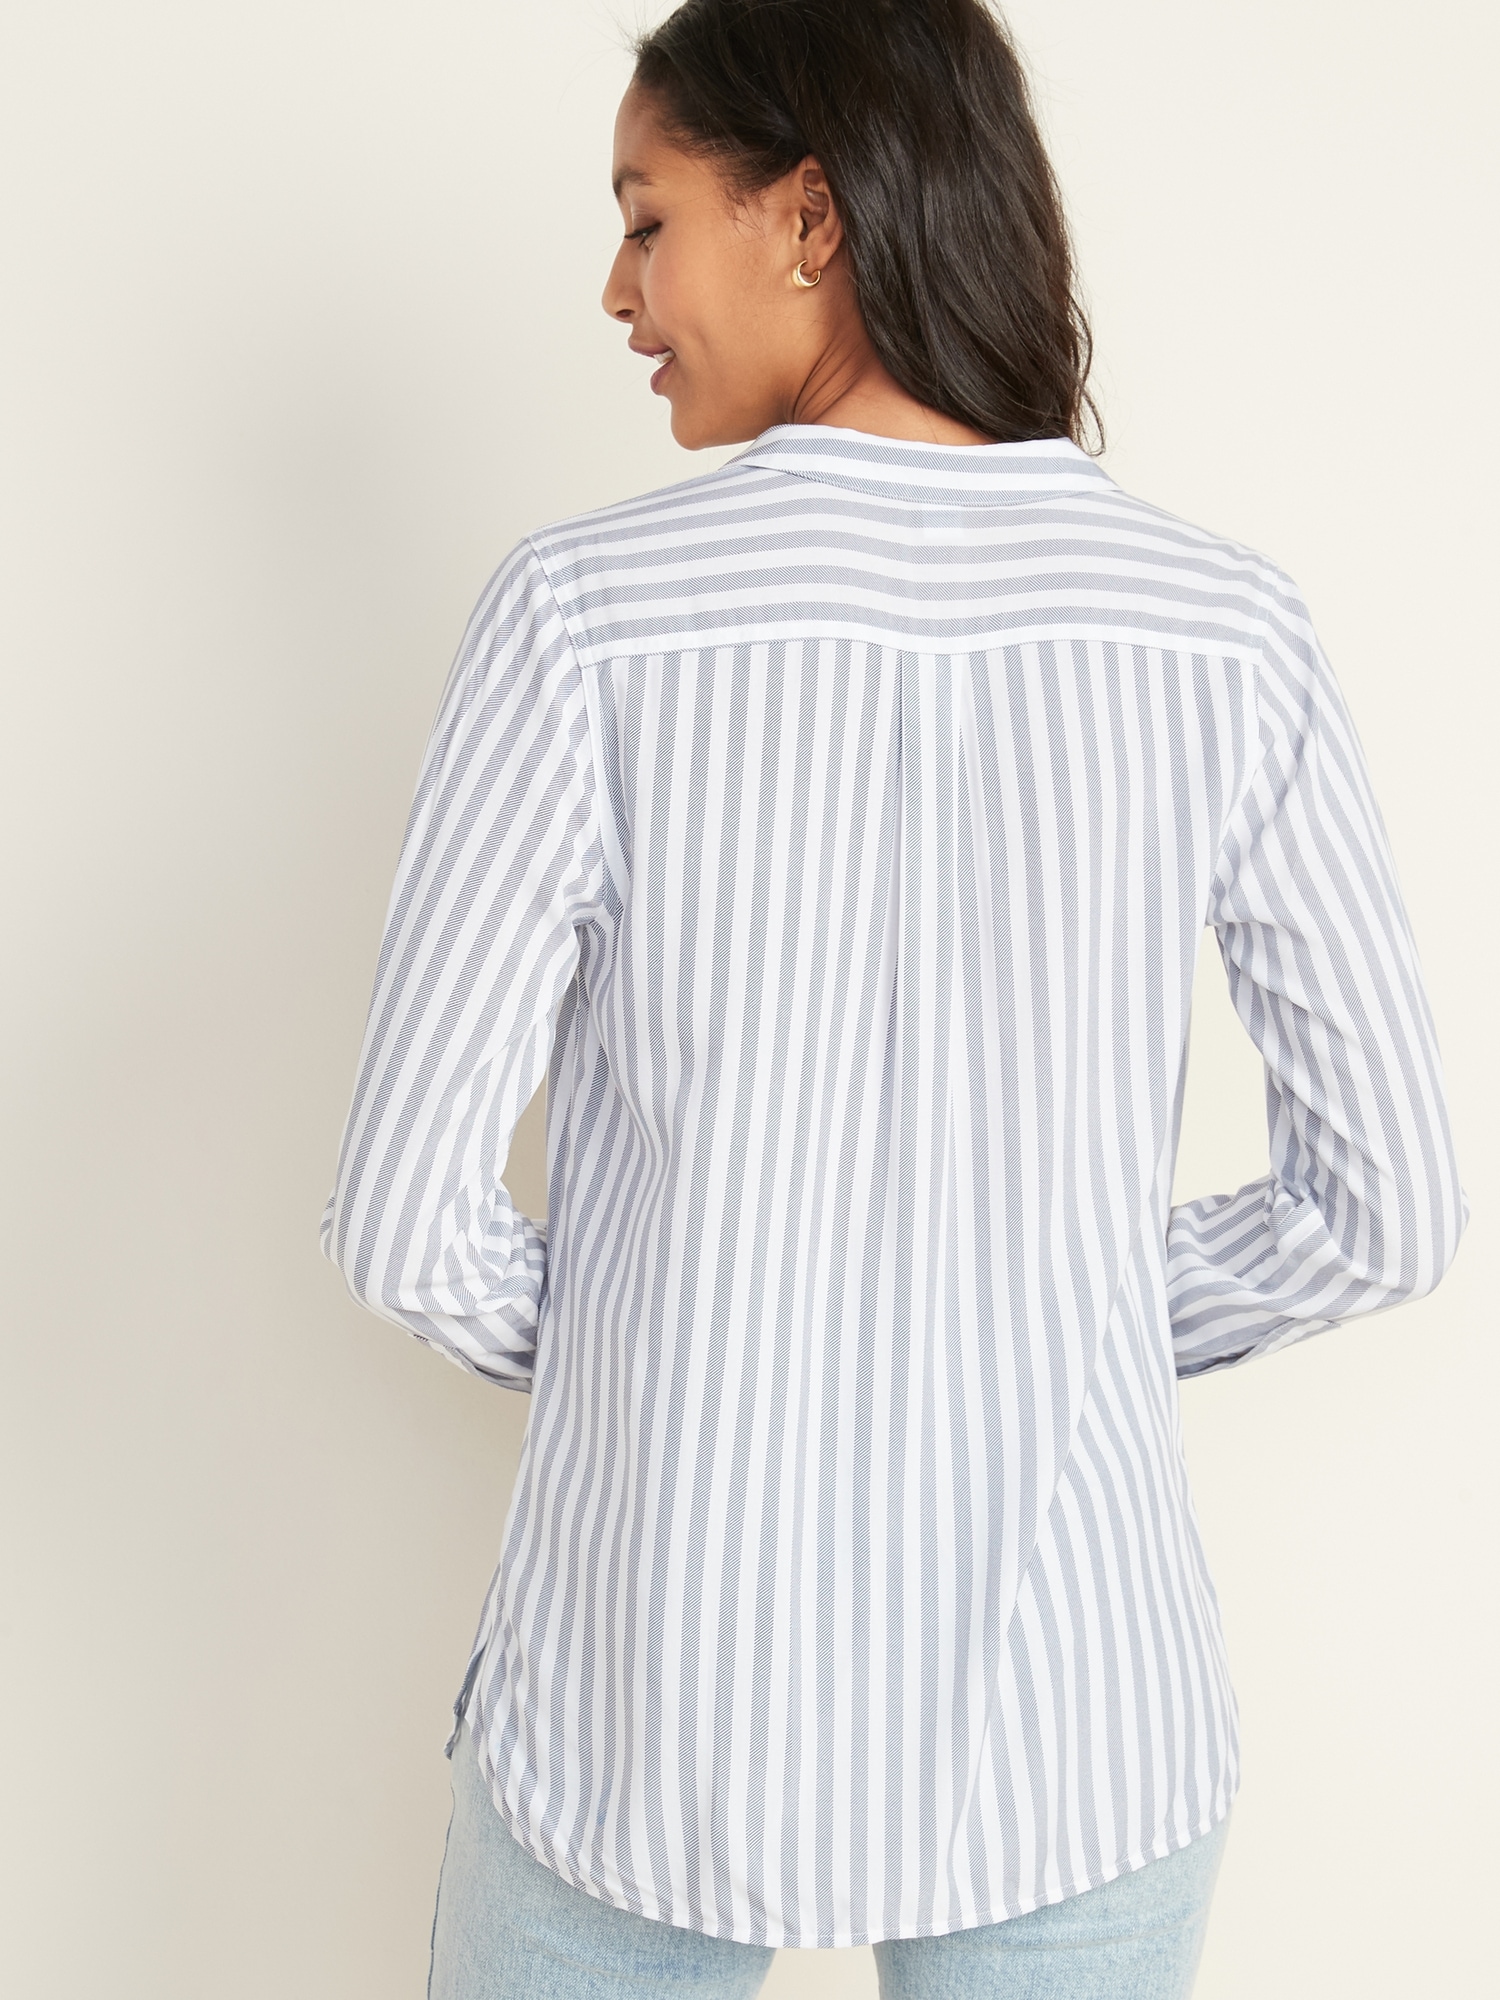 Striped Pocket Shirt for Women | Old Navy